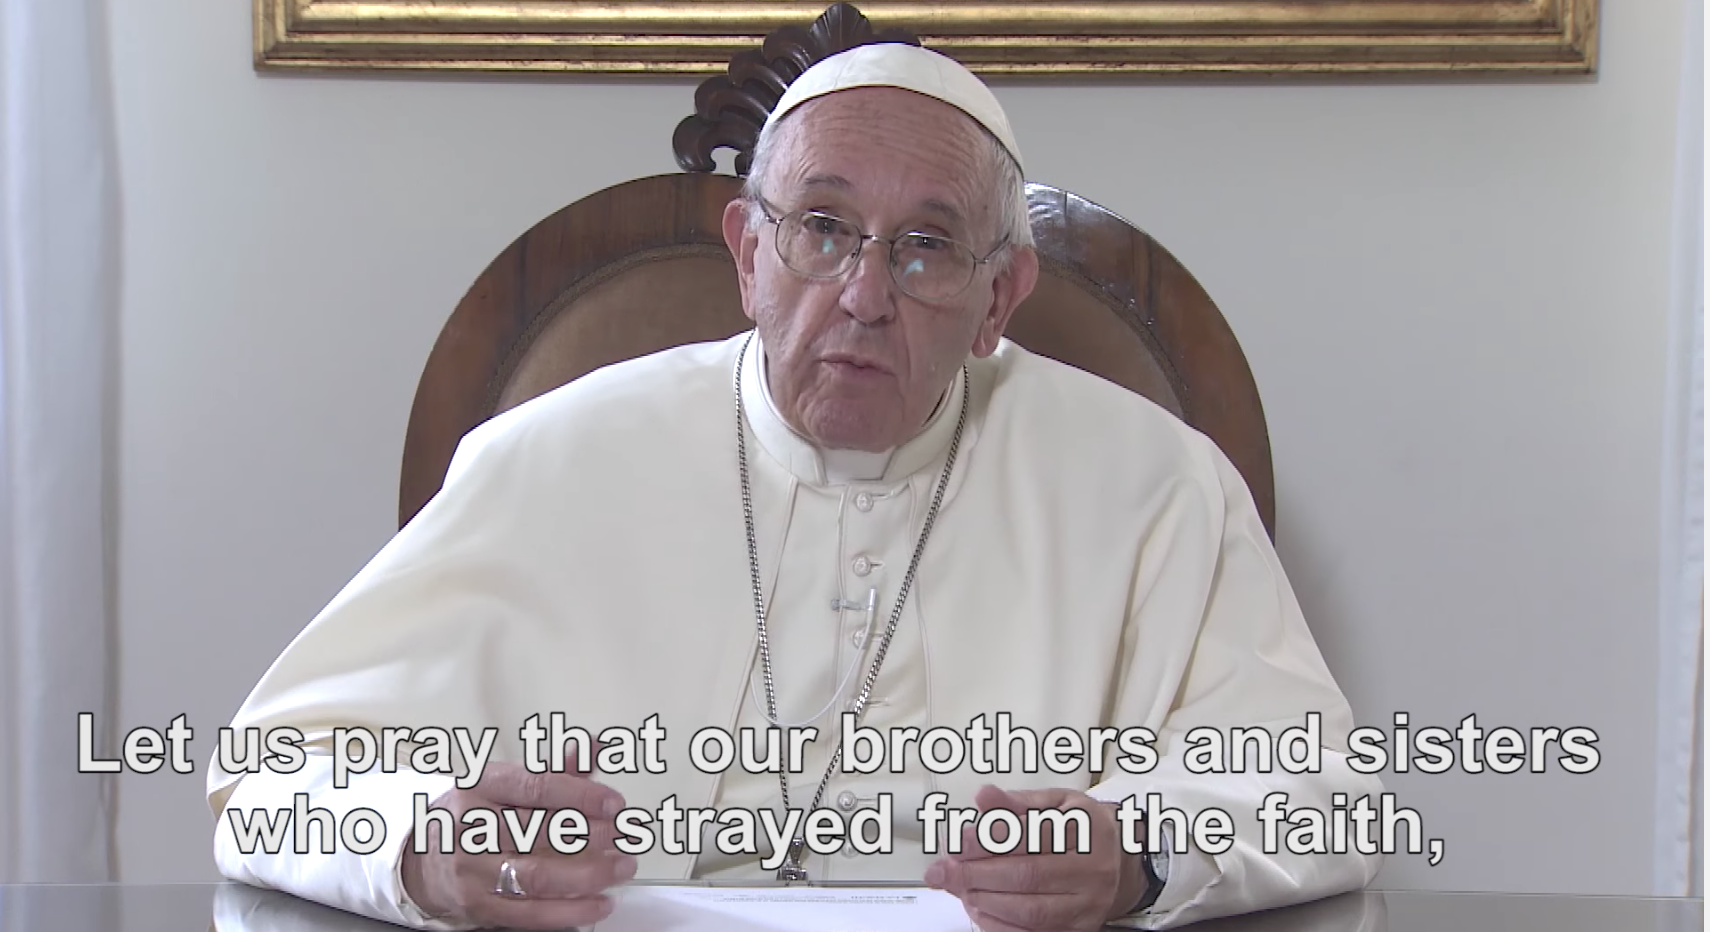 Featured image for “Pope Francis’ July Prayer Intention”